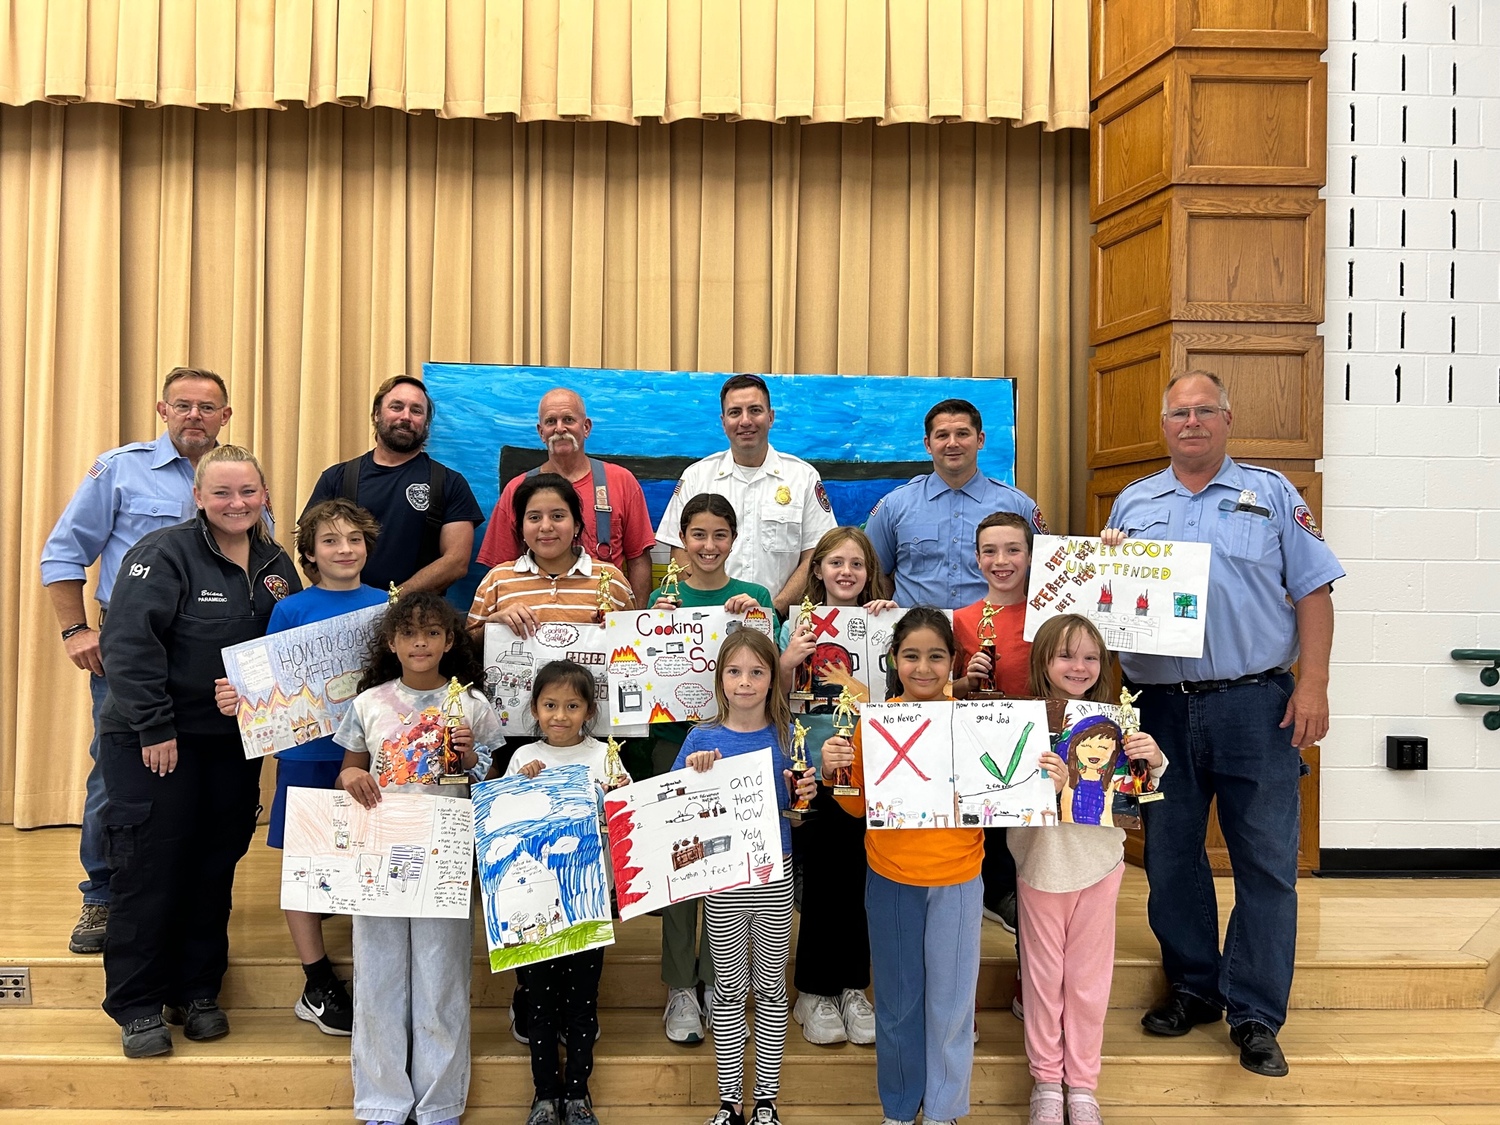 East Quogue Elementary School Students show off the trophies they won in the East Quogue Fire Department's fire safety poster contest. The trophies were presented by members of the fire department. COURTESY EAST QUOGUE SCHOOL DISTRICT